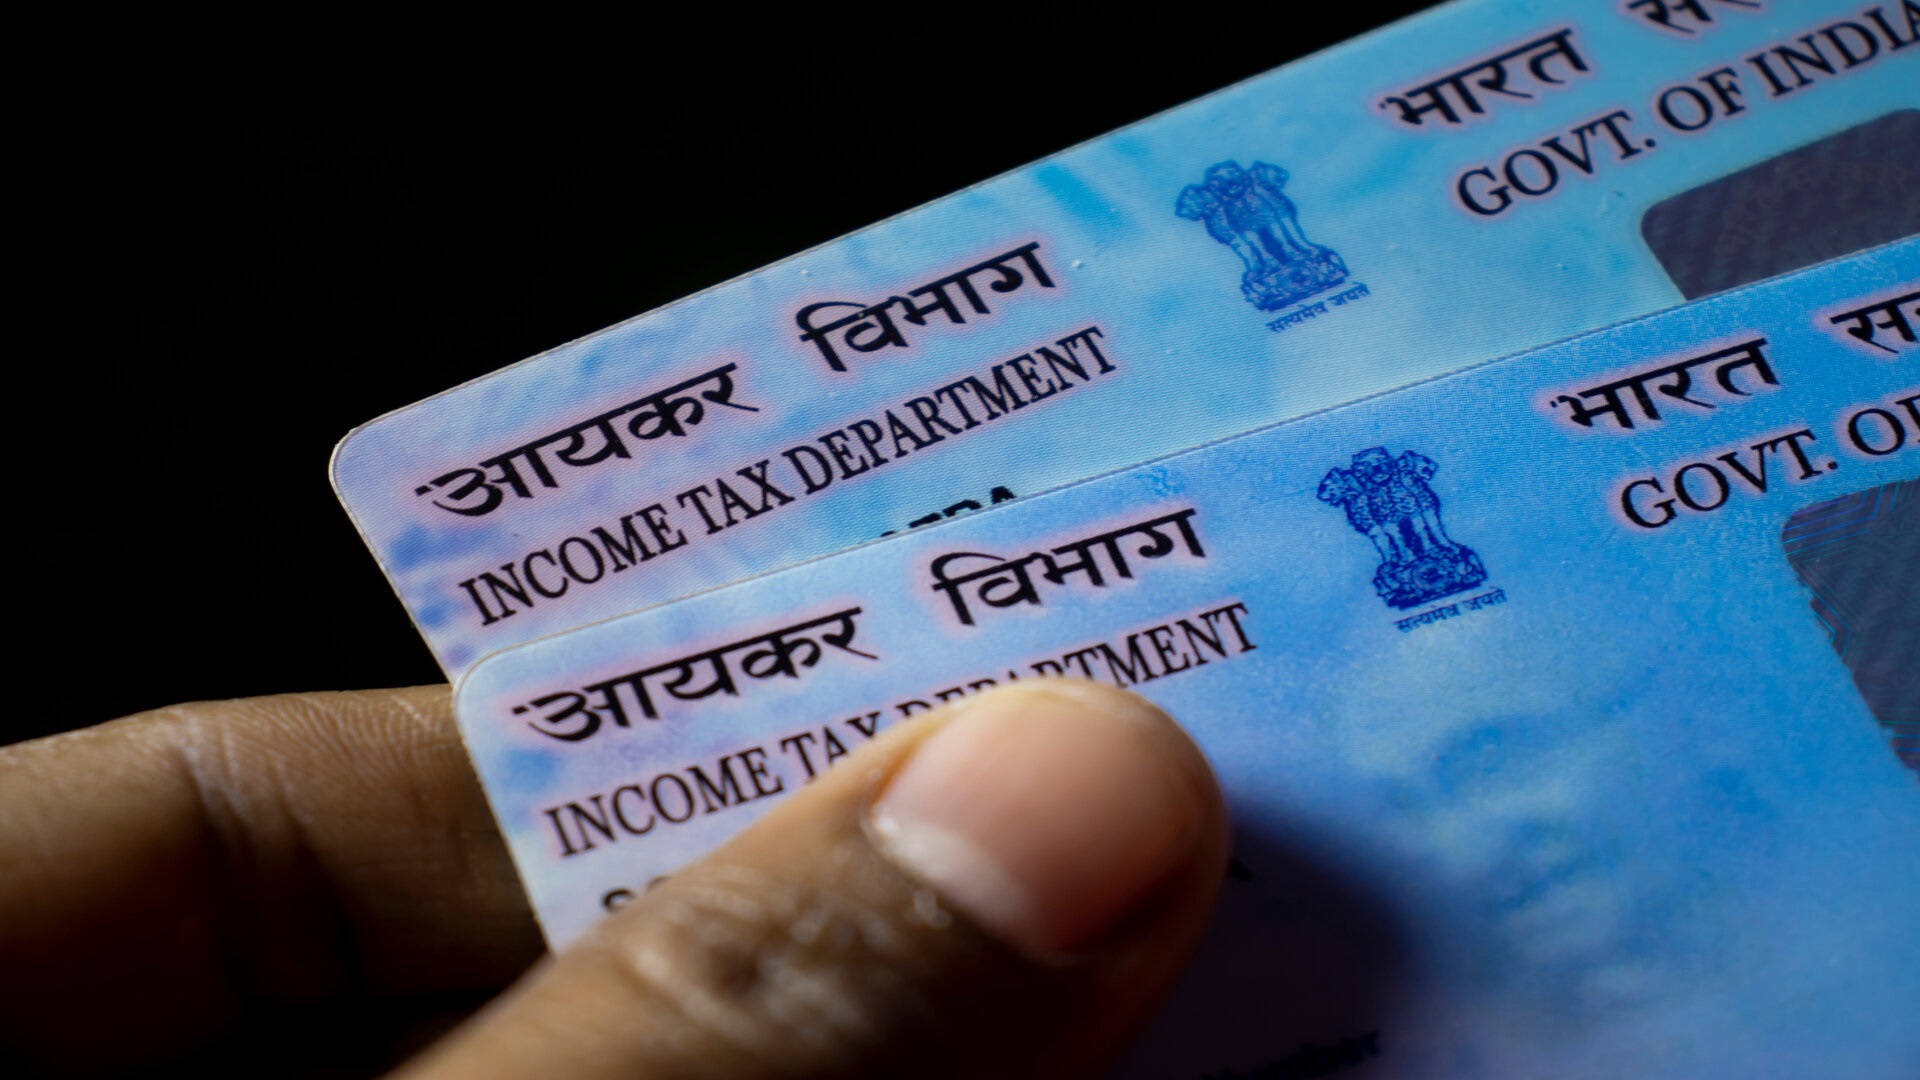 PAN Card correction: How to update Name and date of birth in PAN card online process